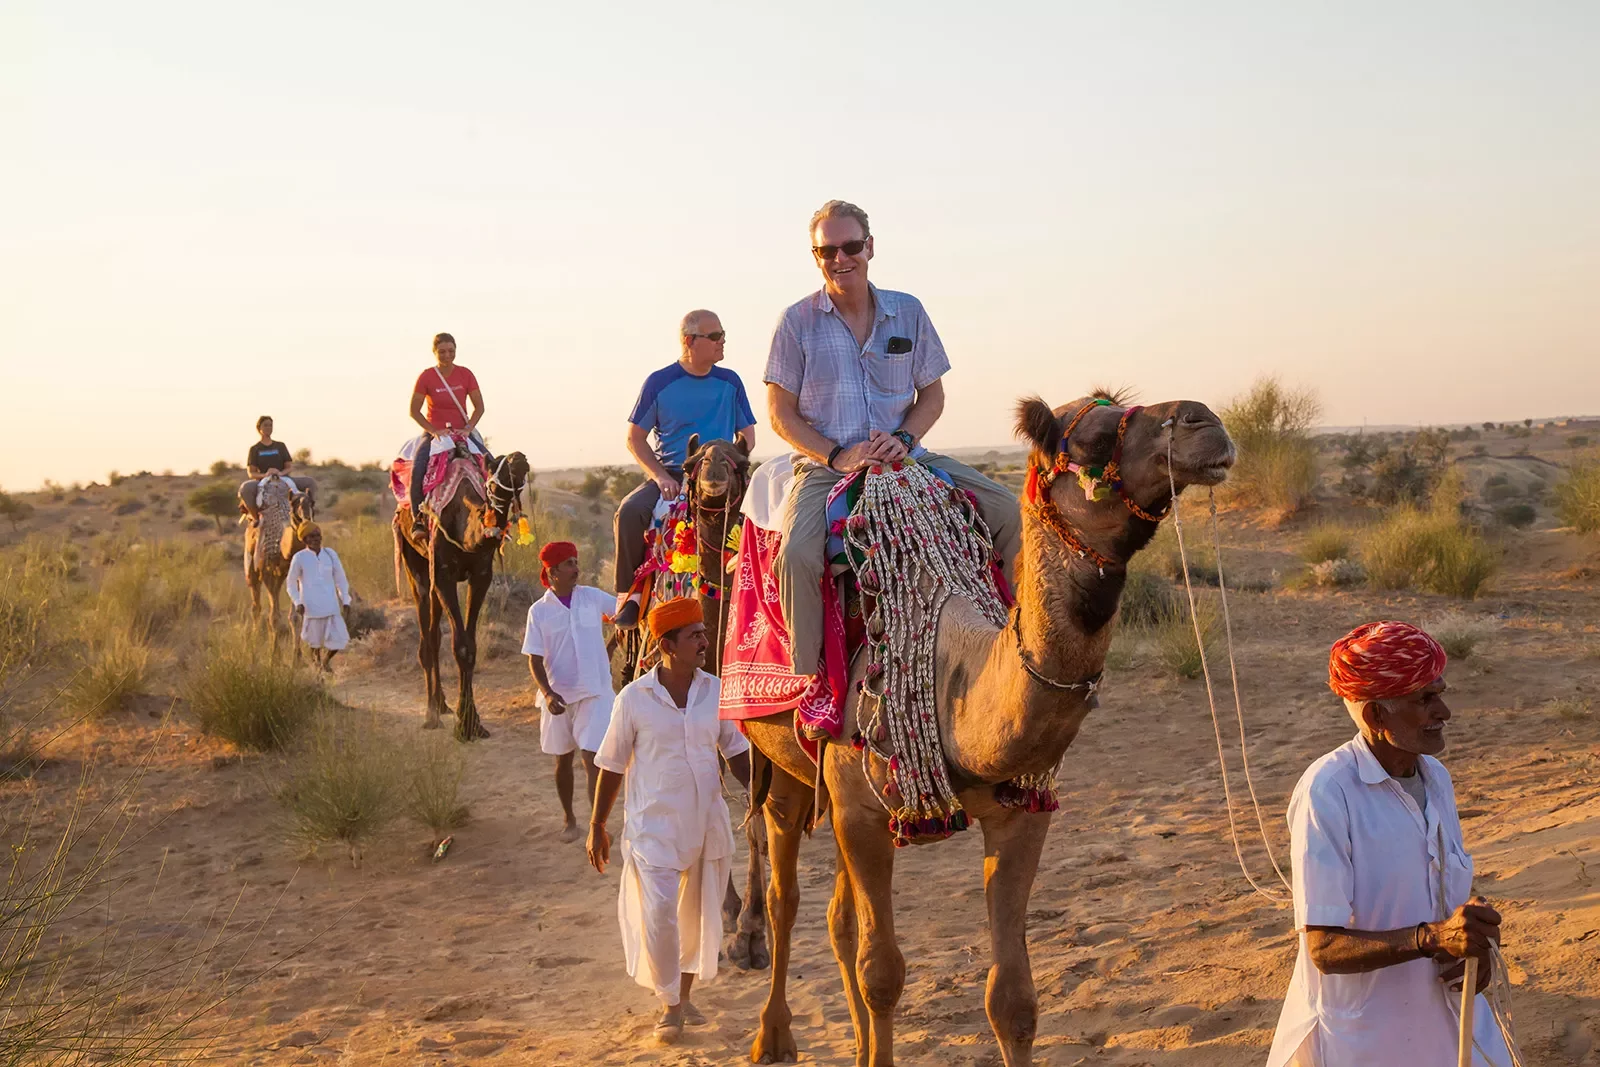 backroads guests riding camels in the desert in India